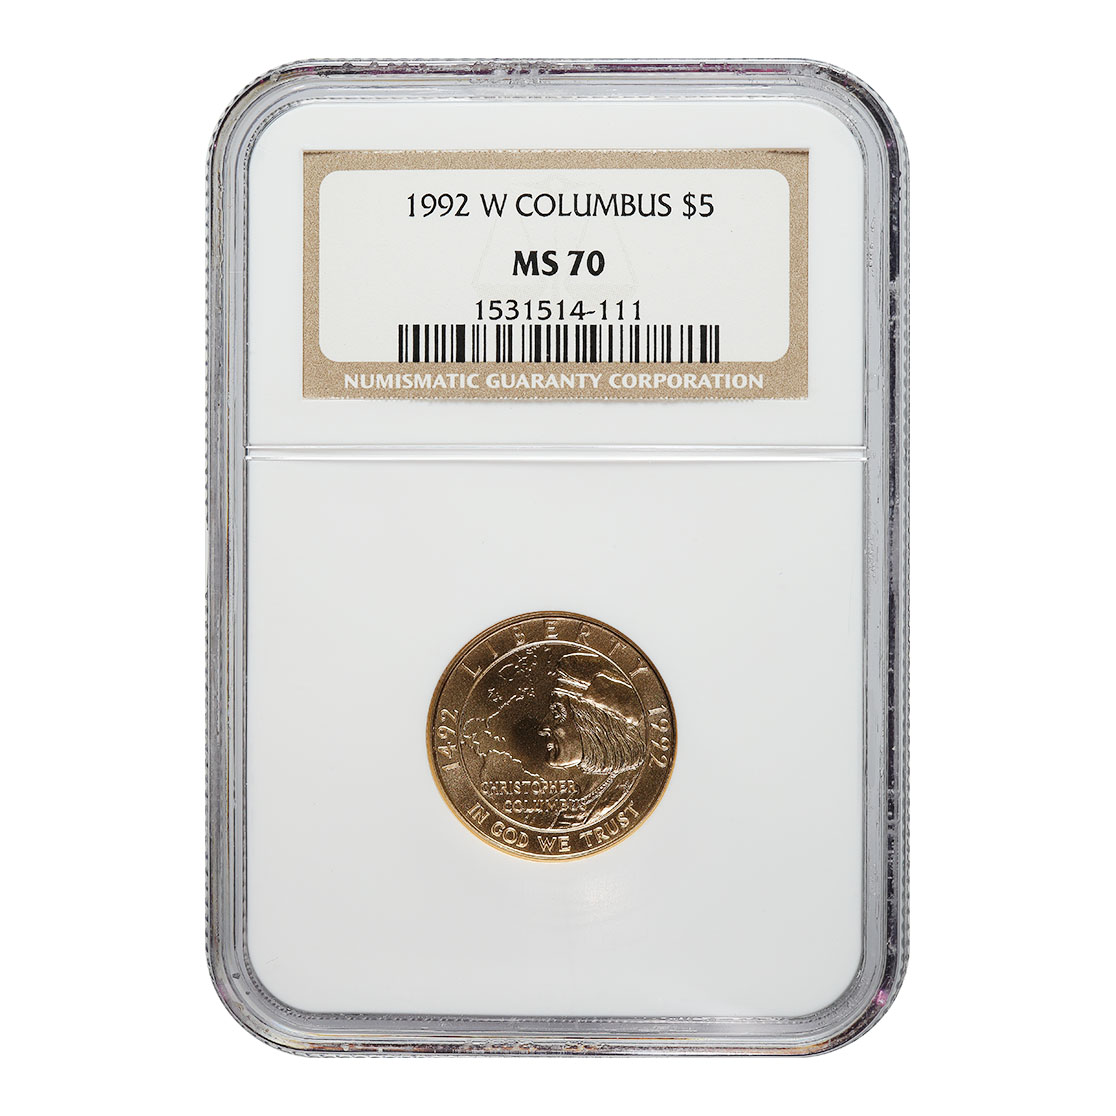 Certified Commemorative $5 Gold 1992-W Columbus MS70 NGC